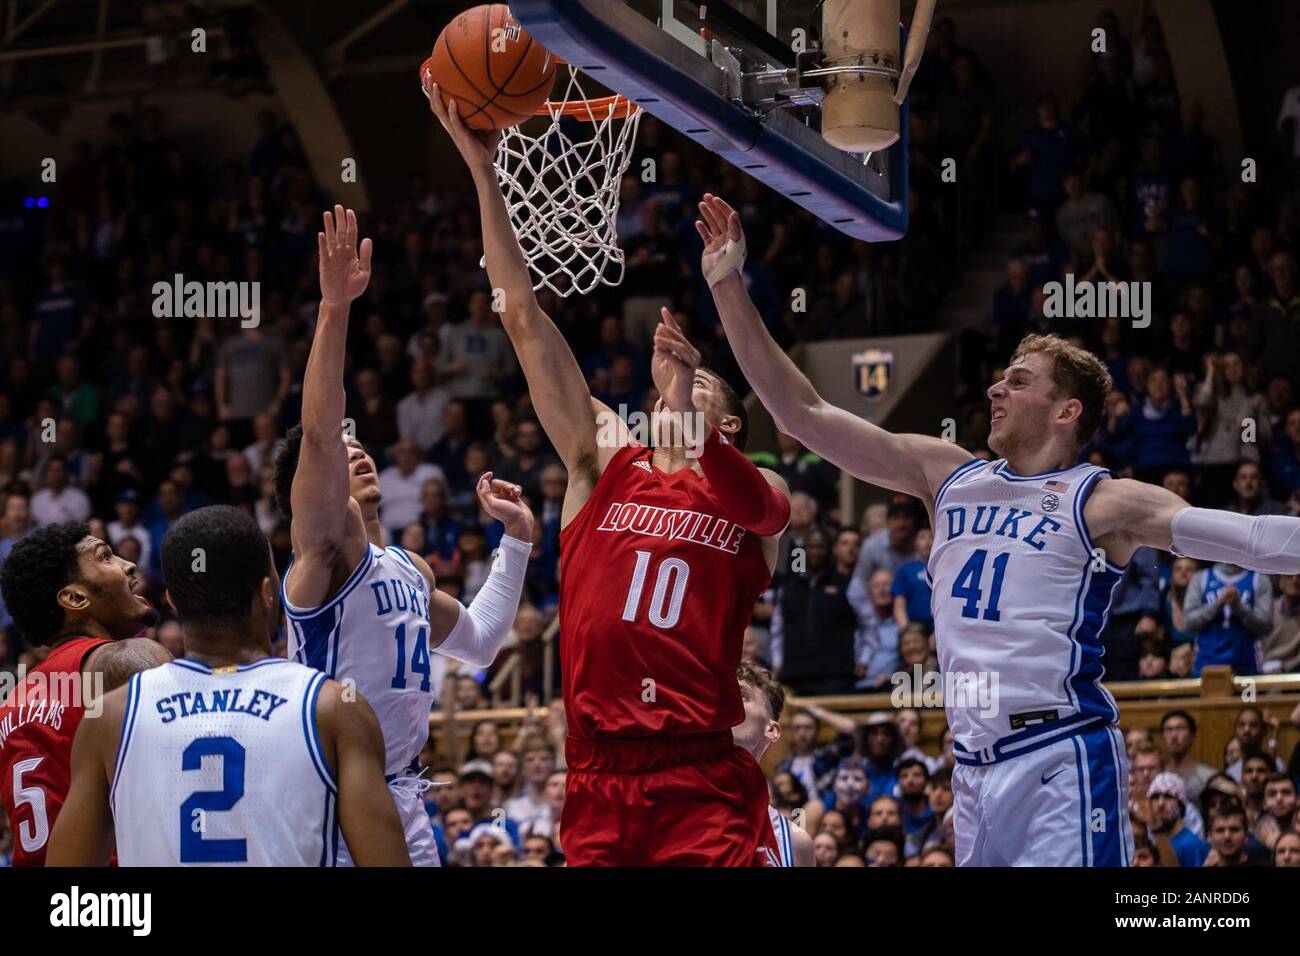 Durham, NC, USA. 18th Jan, 2020. Louisville Guard Samuell Williamson (10) during the NCAA Basketball game between the Louisville Cardinals and Duke Blue Devils at Cameron Indoor Stadium in Durham, NC. Brian McWaltersCSM/Alamy Live News Stock Photo